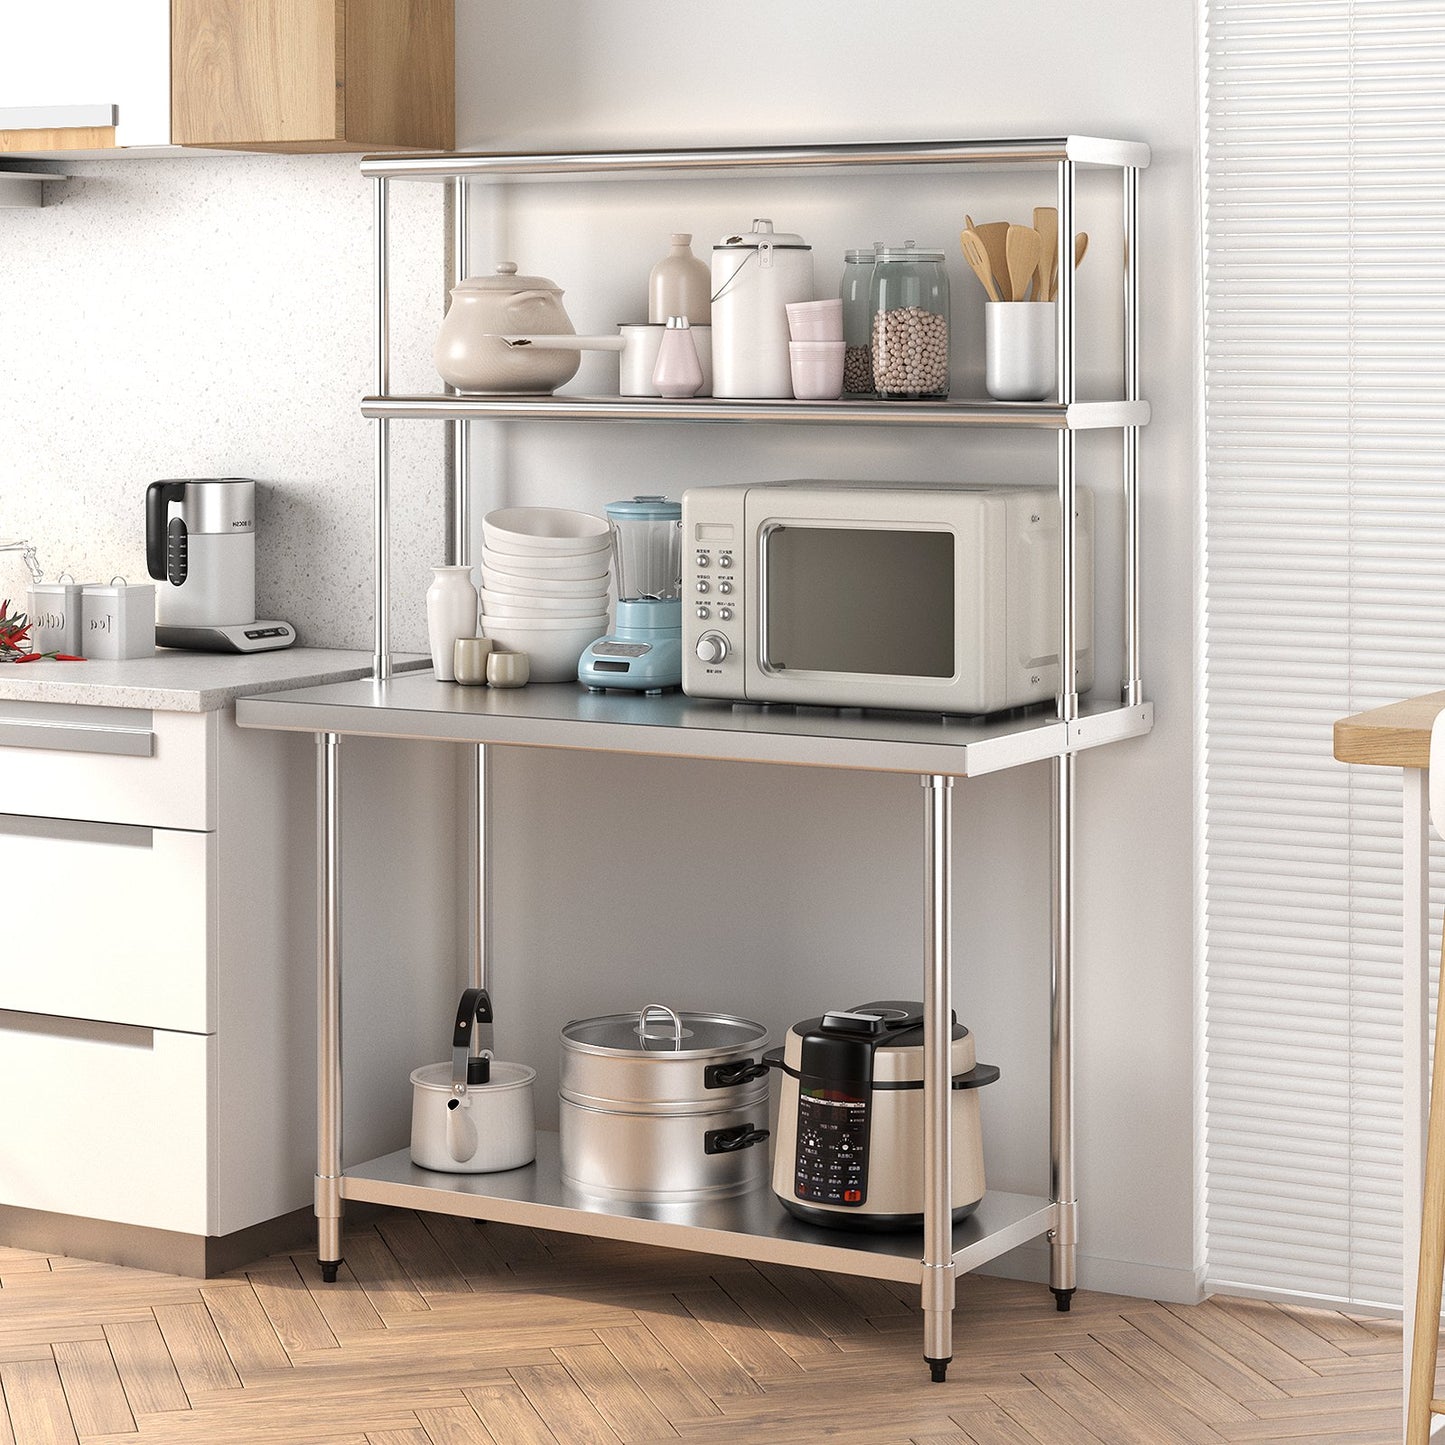 Stainless Steel Overshelf with Adjustable Lower Shelf for Home Kitchen, Silver